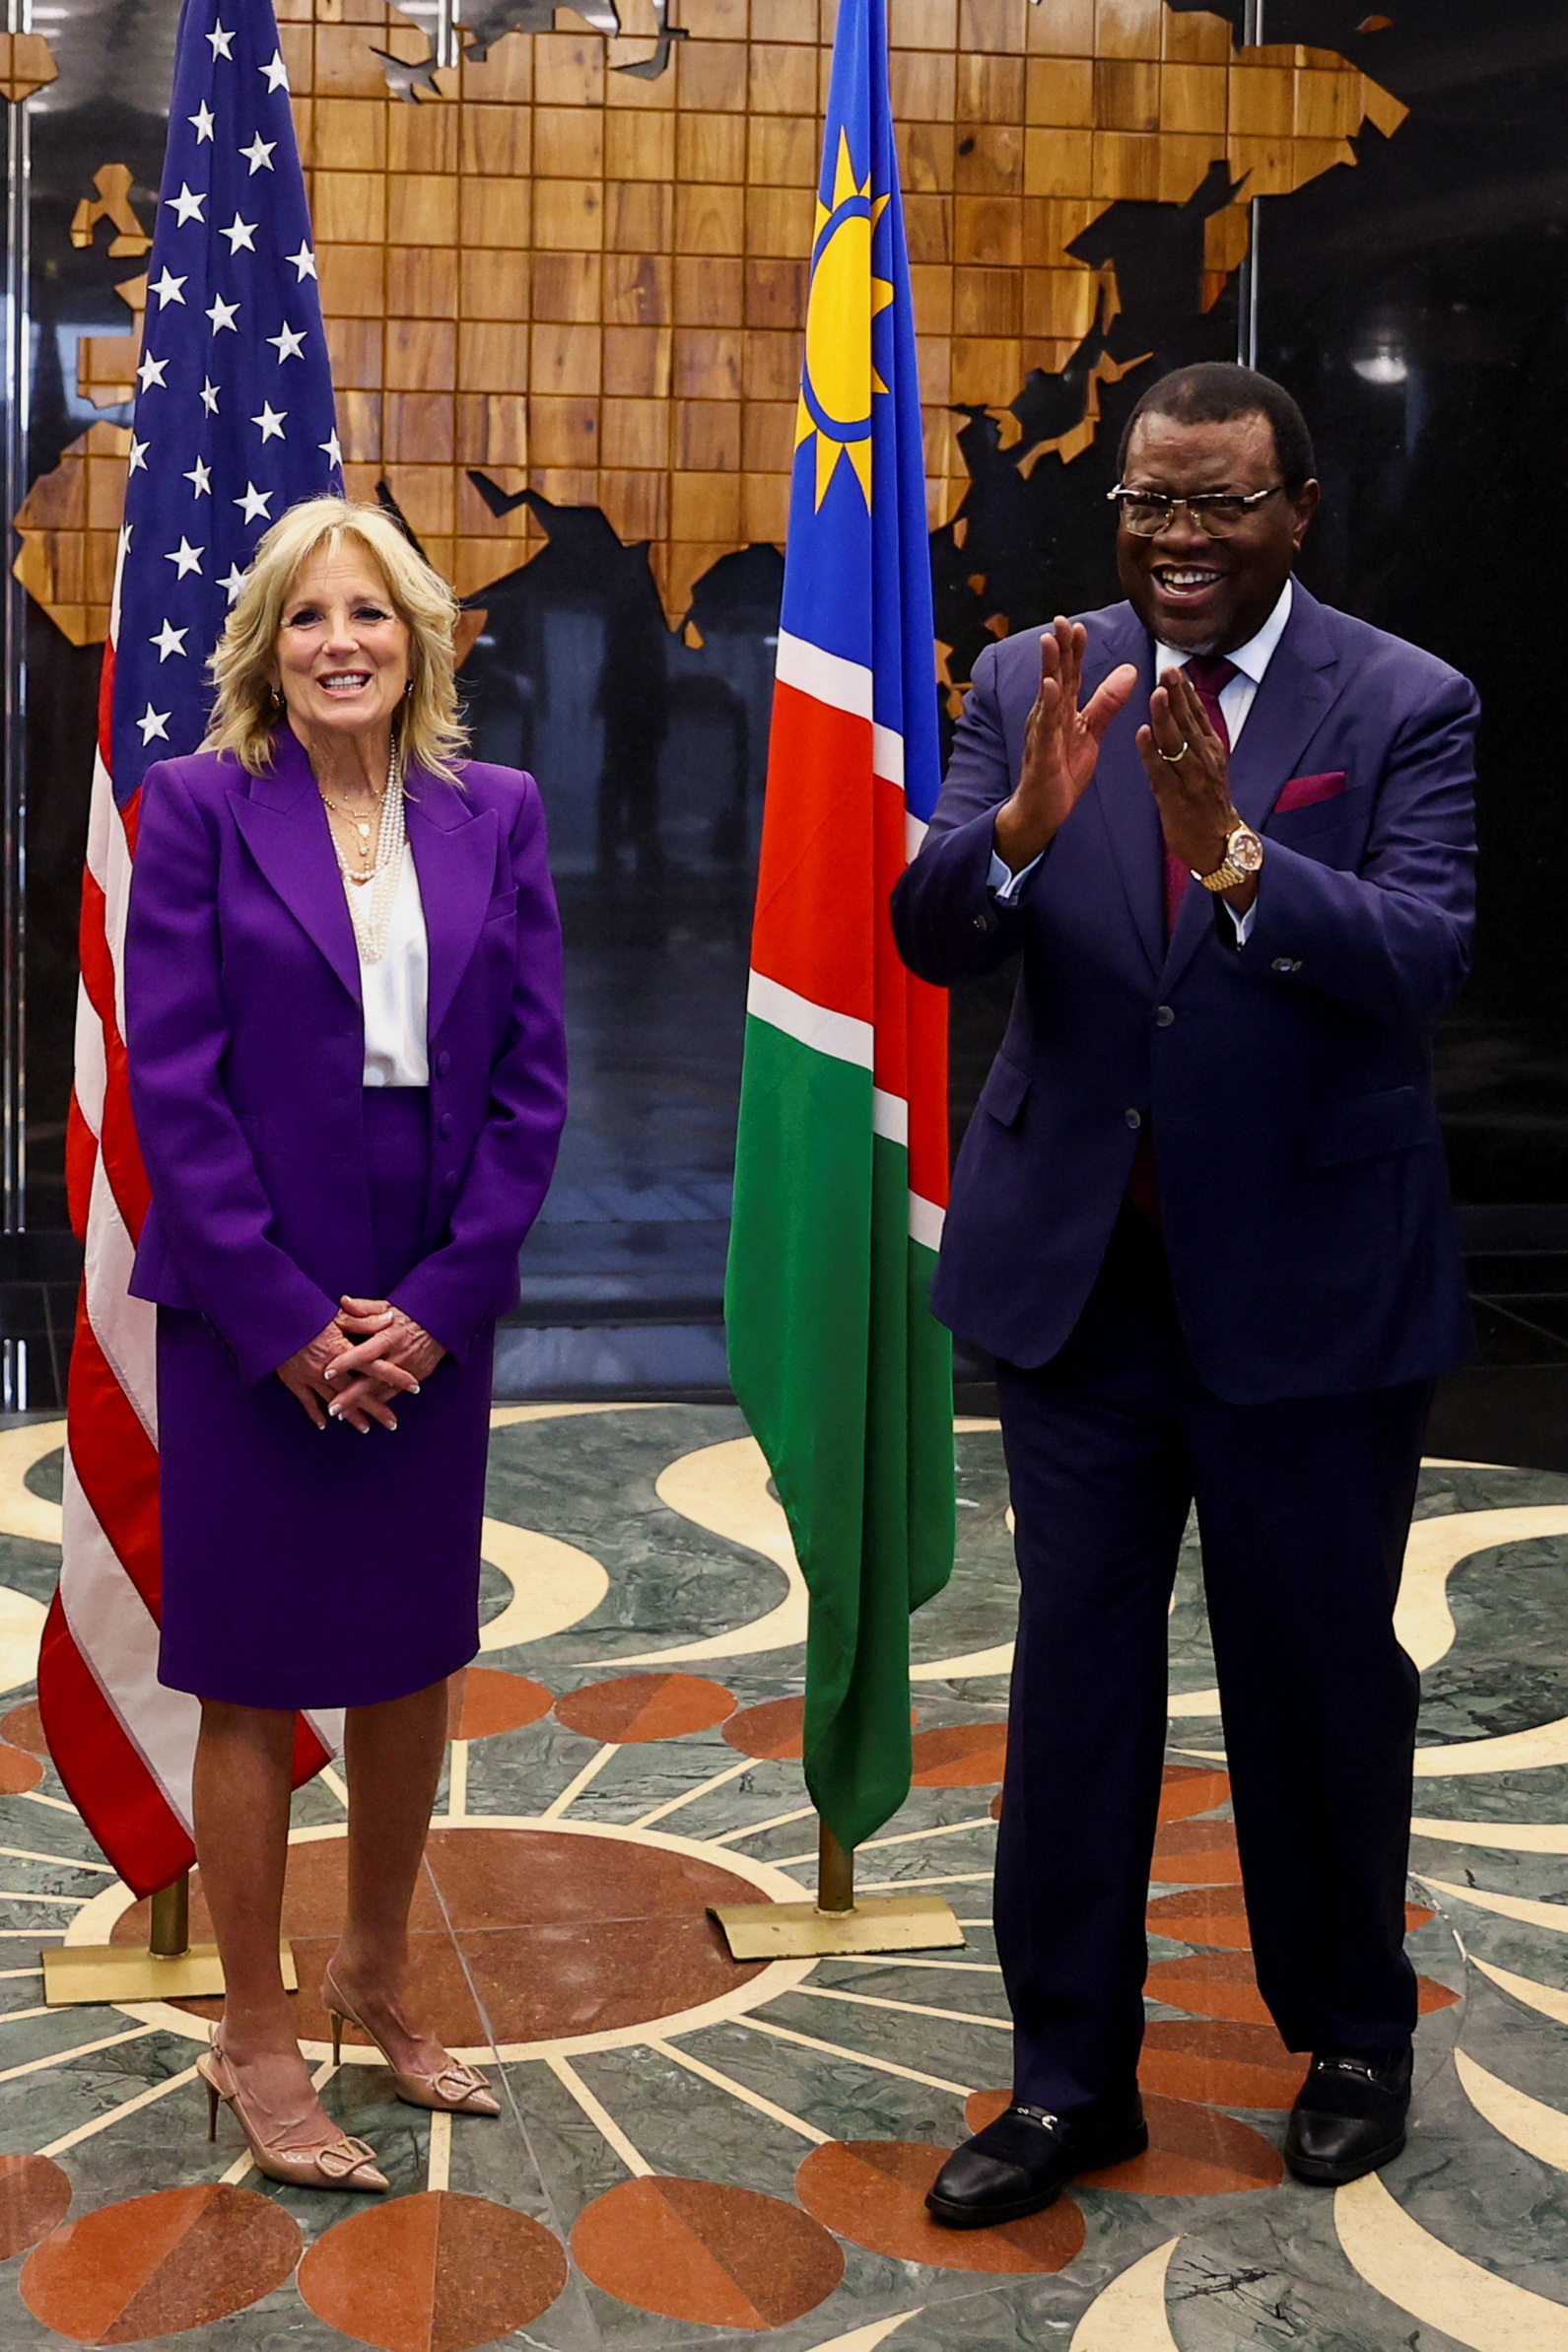 PHOTO: Namibian President Hage Geingob and U.S. First Lady Jill Biden meet during the first leg of her African visit, at the State House, Feb. 22, 2023, in Windhoek, Namibia.